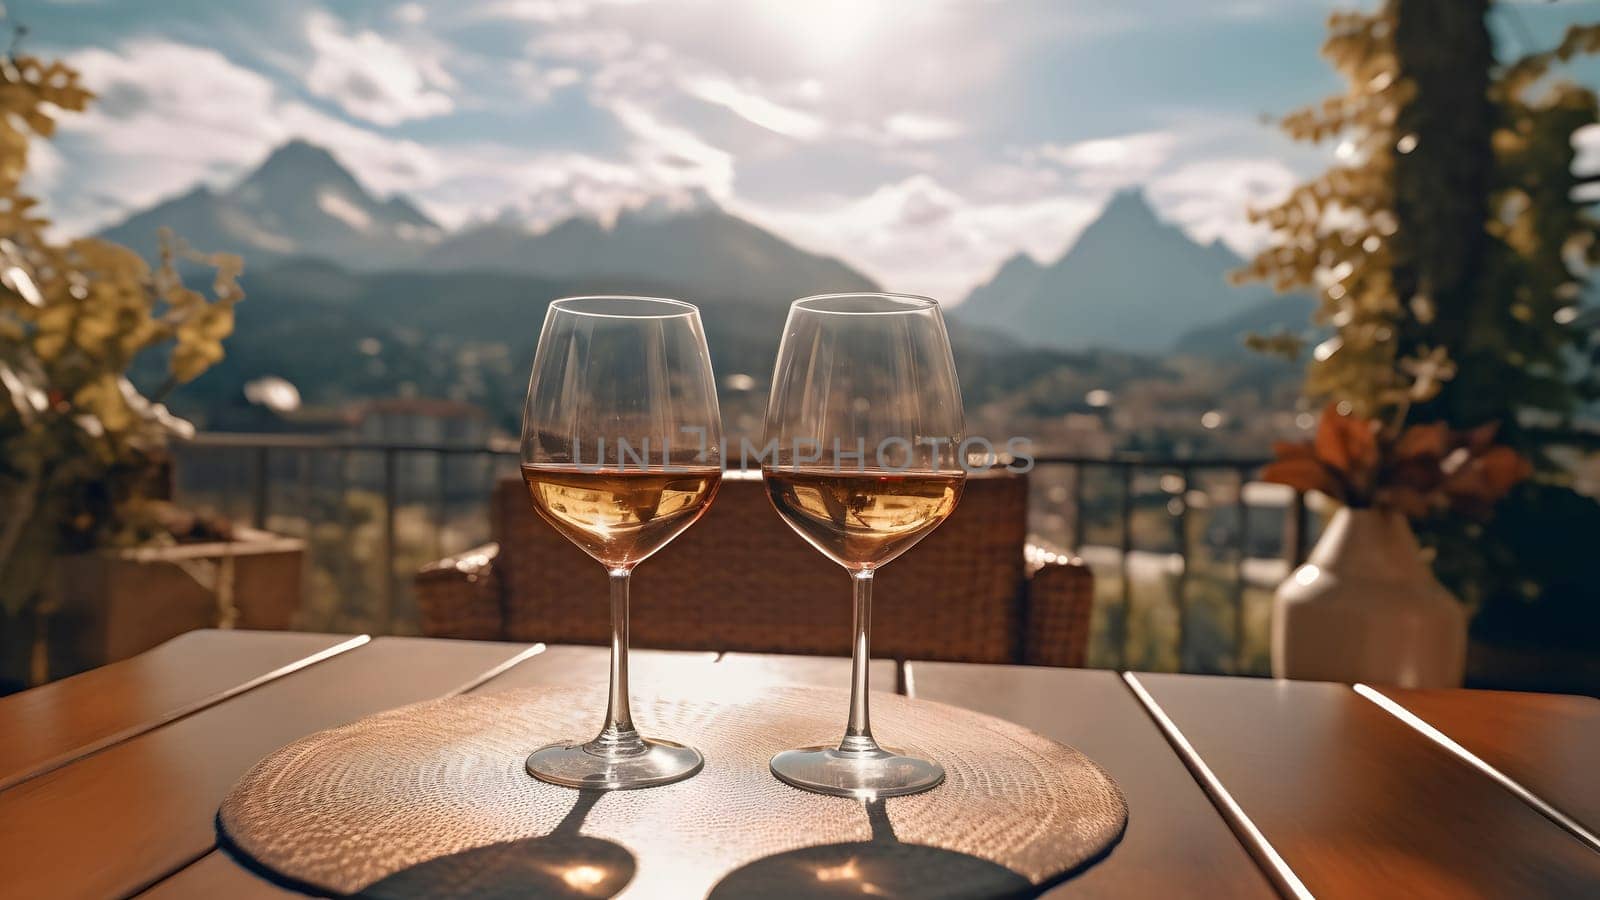 table on a terace with two glasses of wine, sunshine, summervibes, mountains in the background, neural network generated photorealistic image by z1b